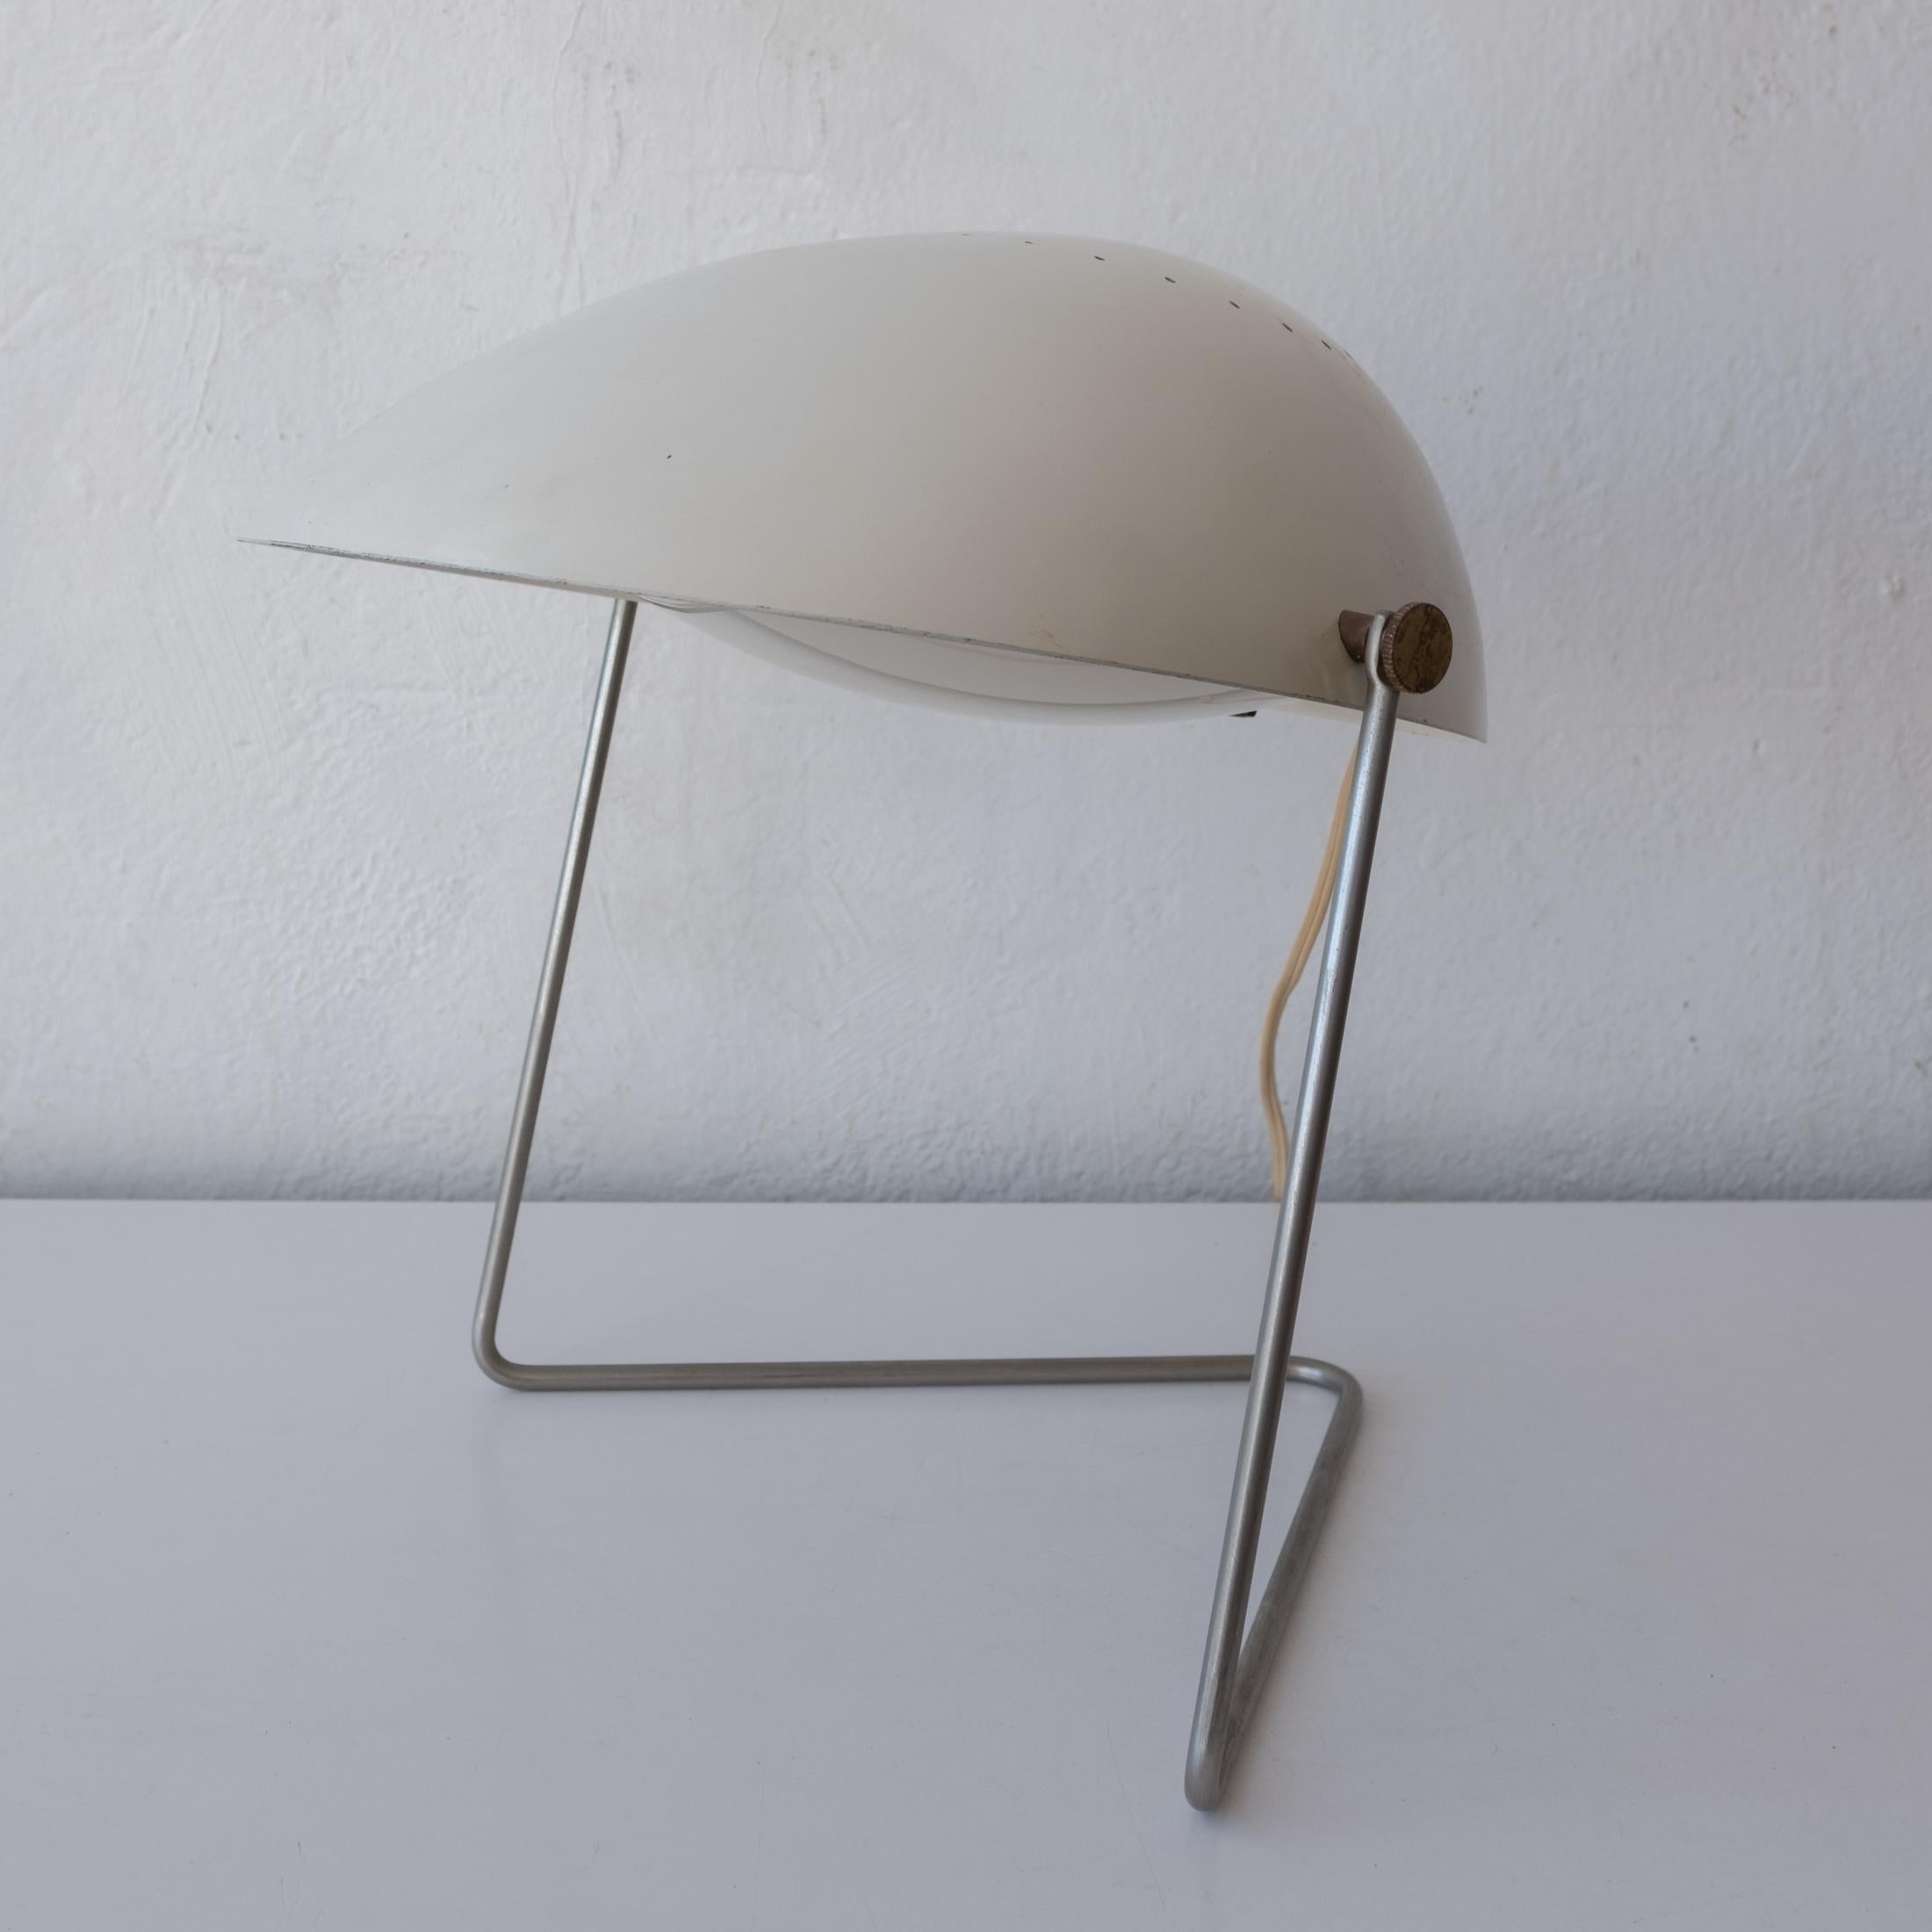 Metal Gerald Thurston Wall Table or Desk Cricket Lamp Midcentury , 1950s